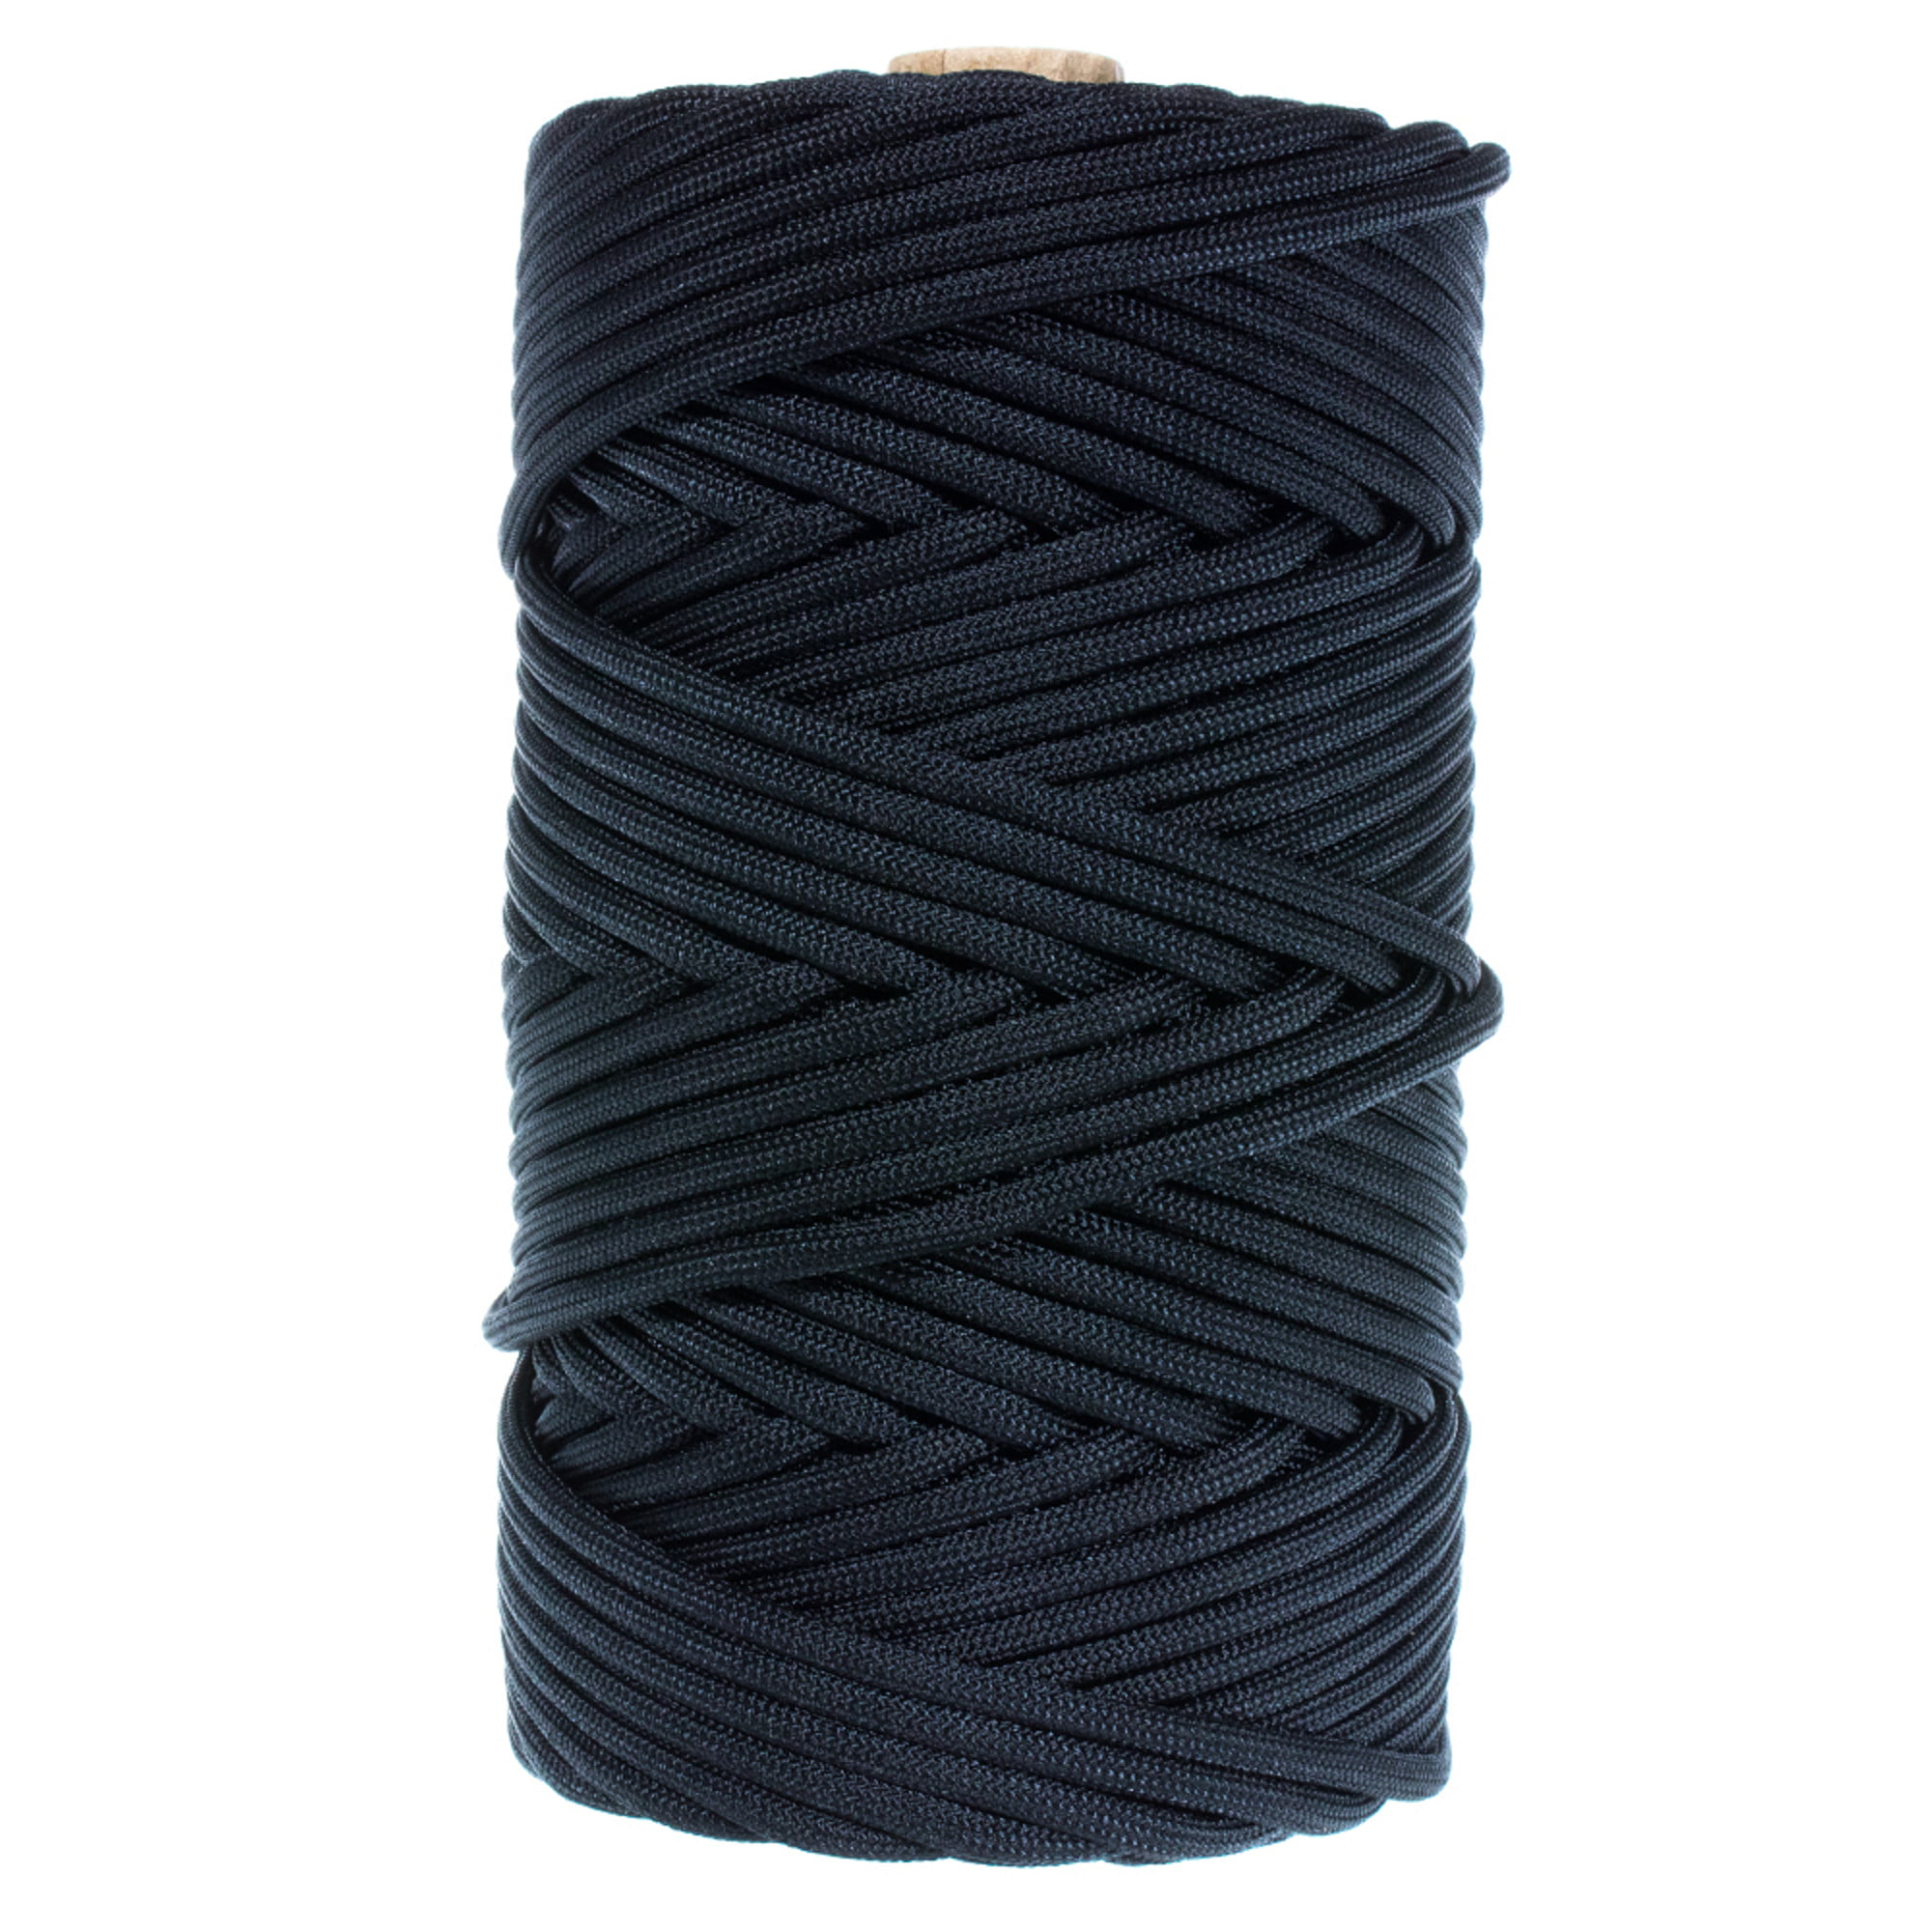 Made in The USA Parachute Cord 550 Cord 550lb Tensile Strength GOLBERG G Paracord Rope 550 Type III Paracord 100% Nylon 